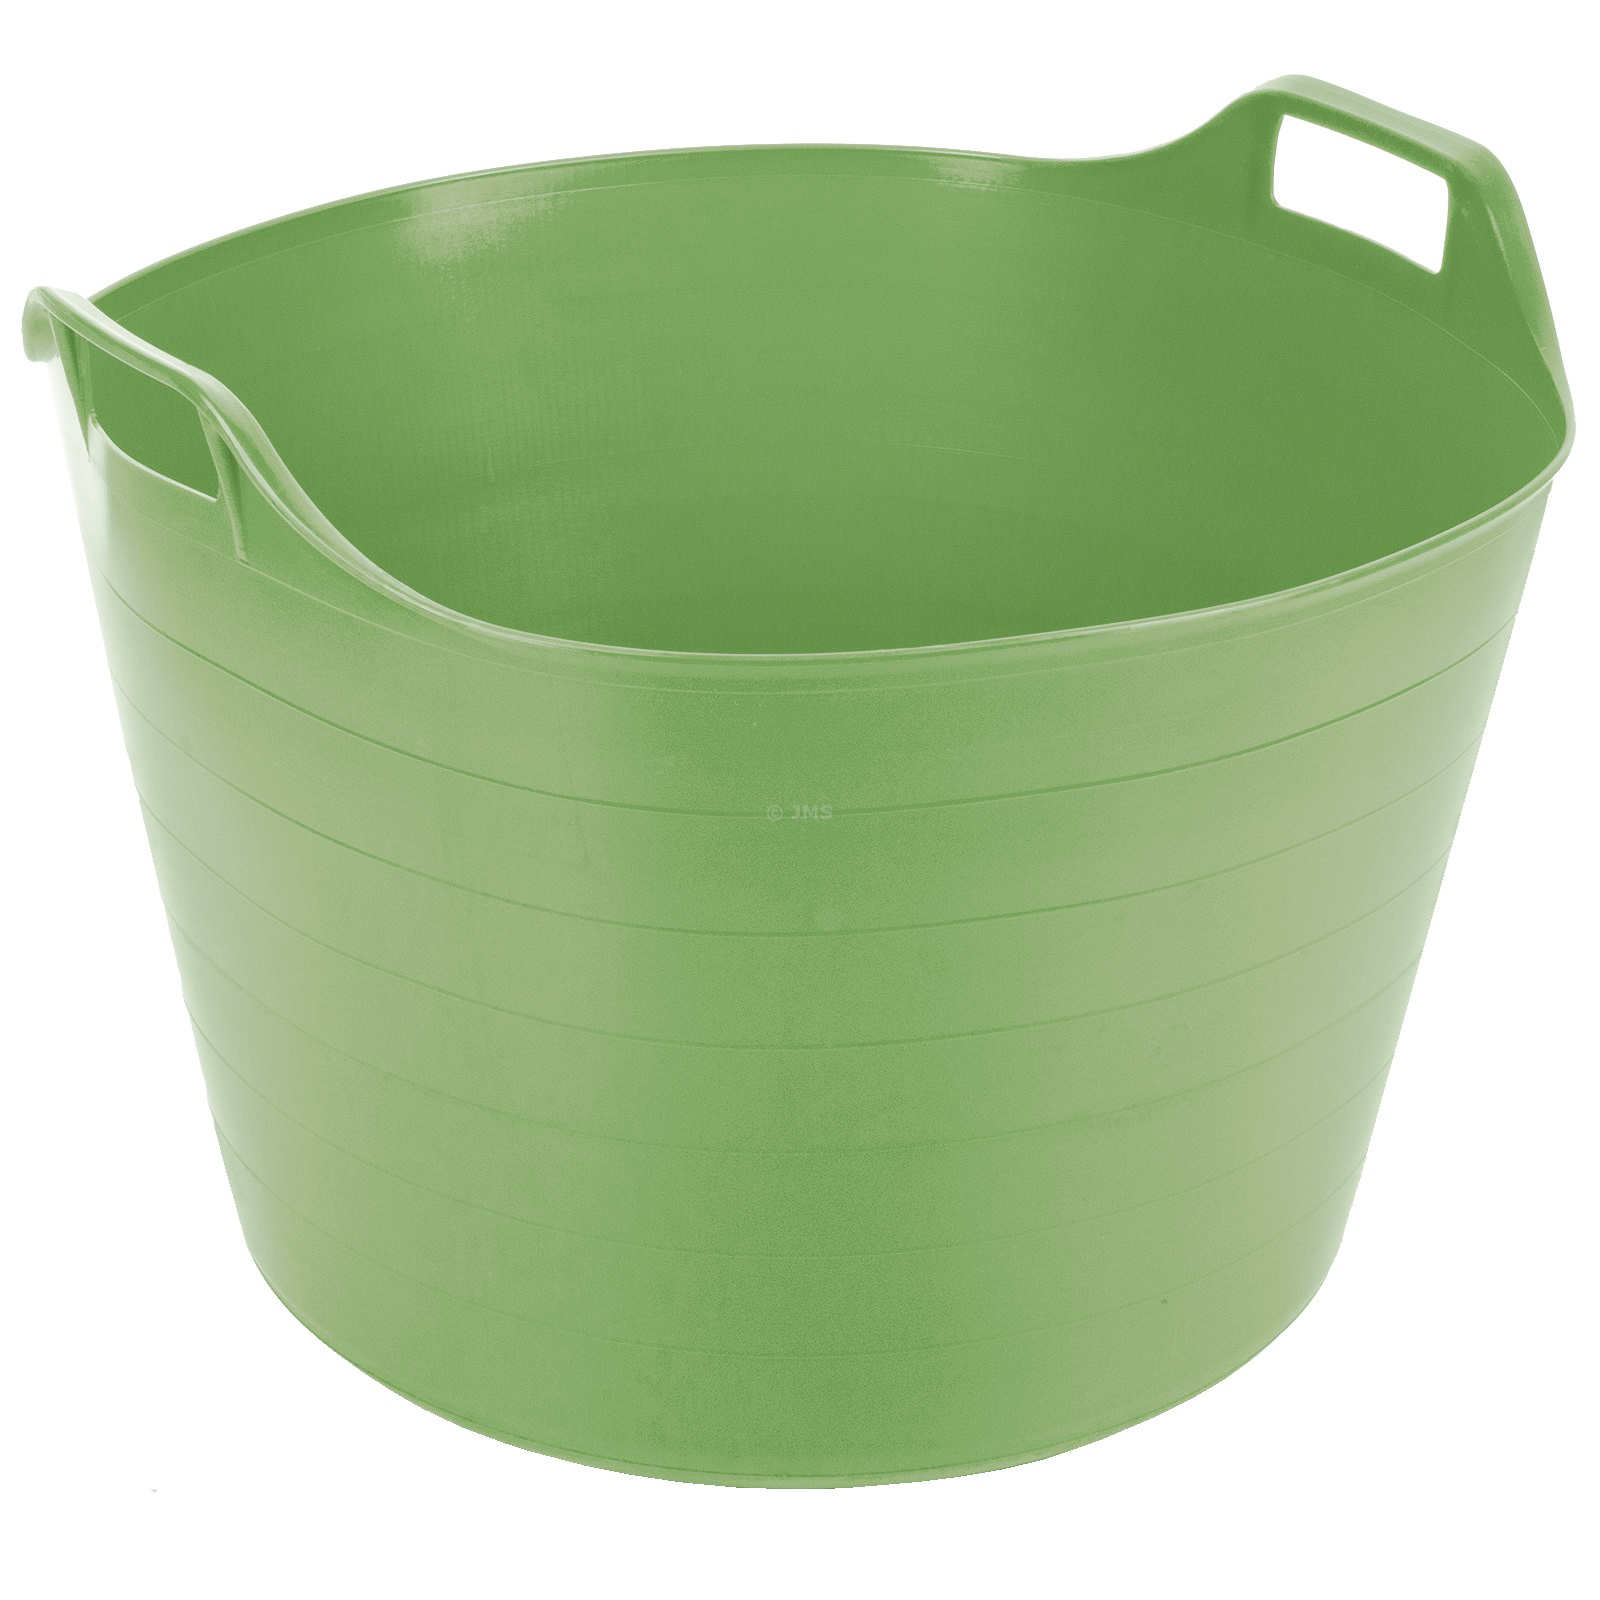 75L LIME GREEN Flexi Tub Extra Large Flexible Storage Builders Bucket Home Garden Animal Feed Storage